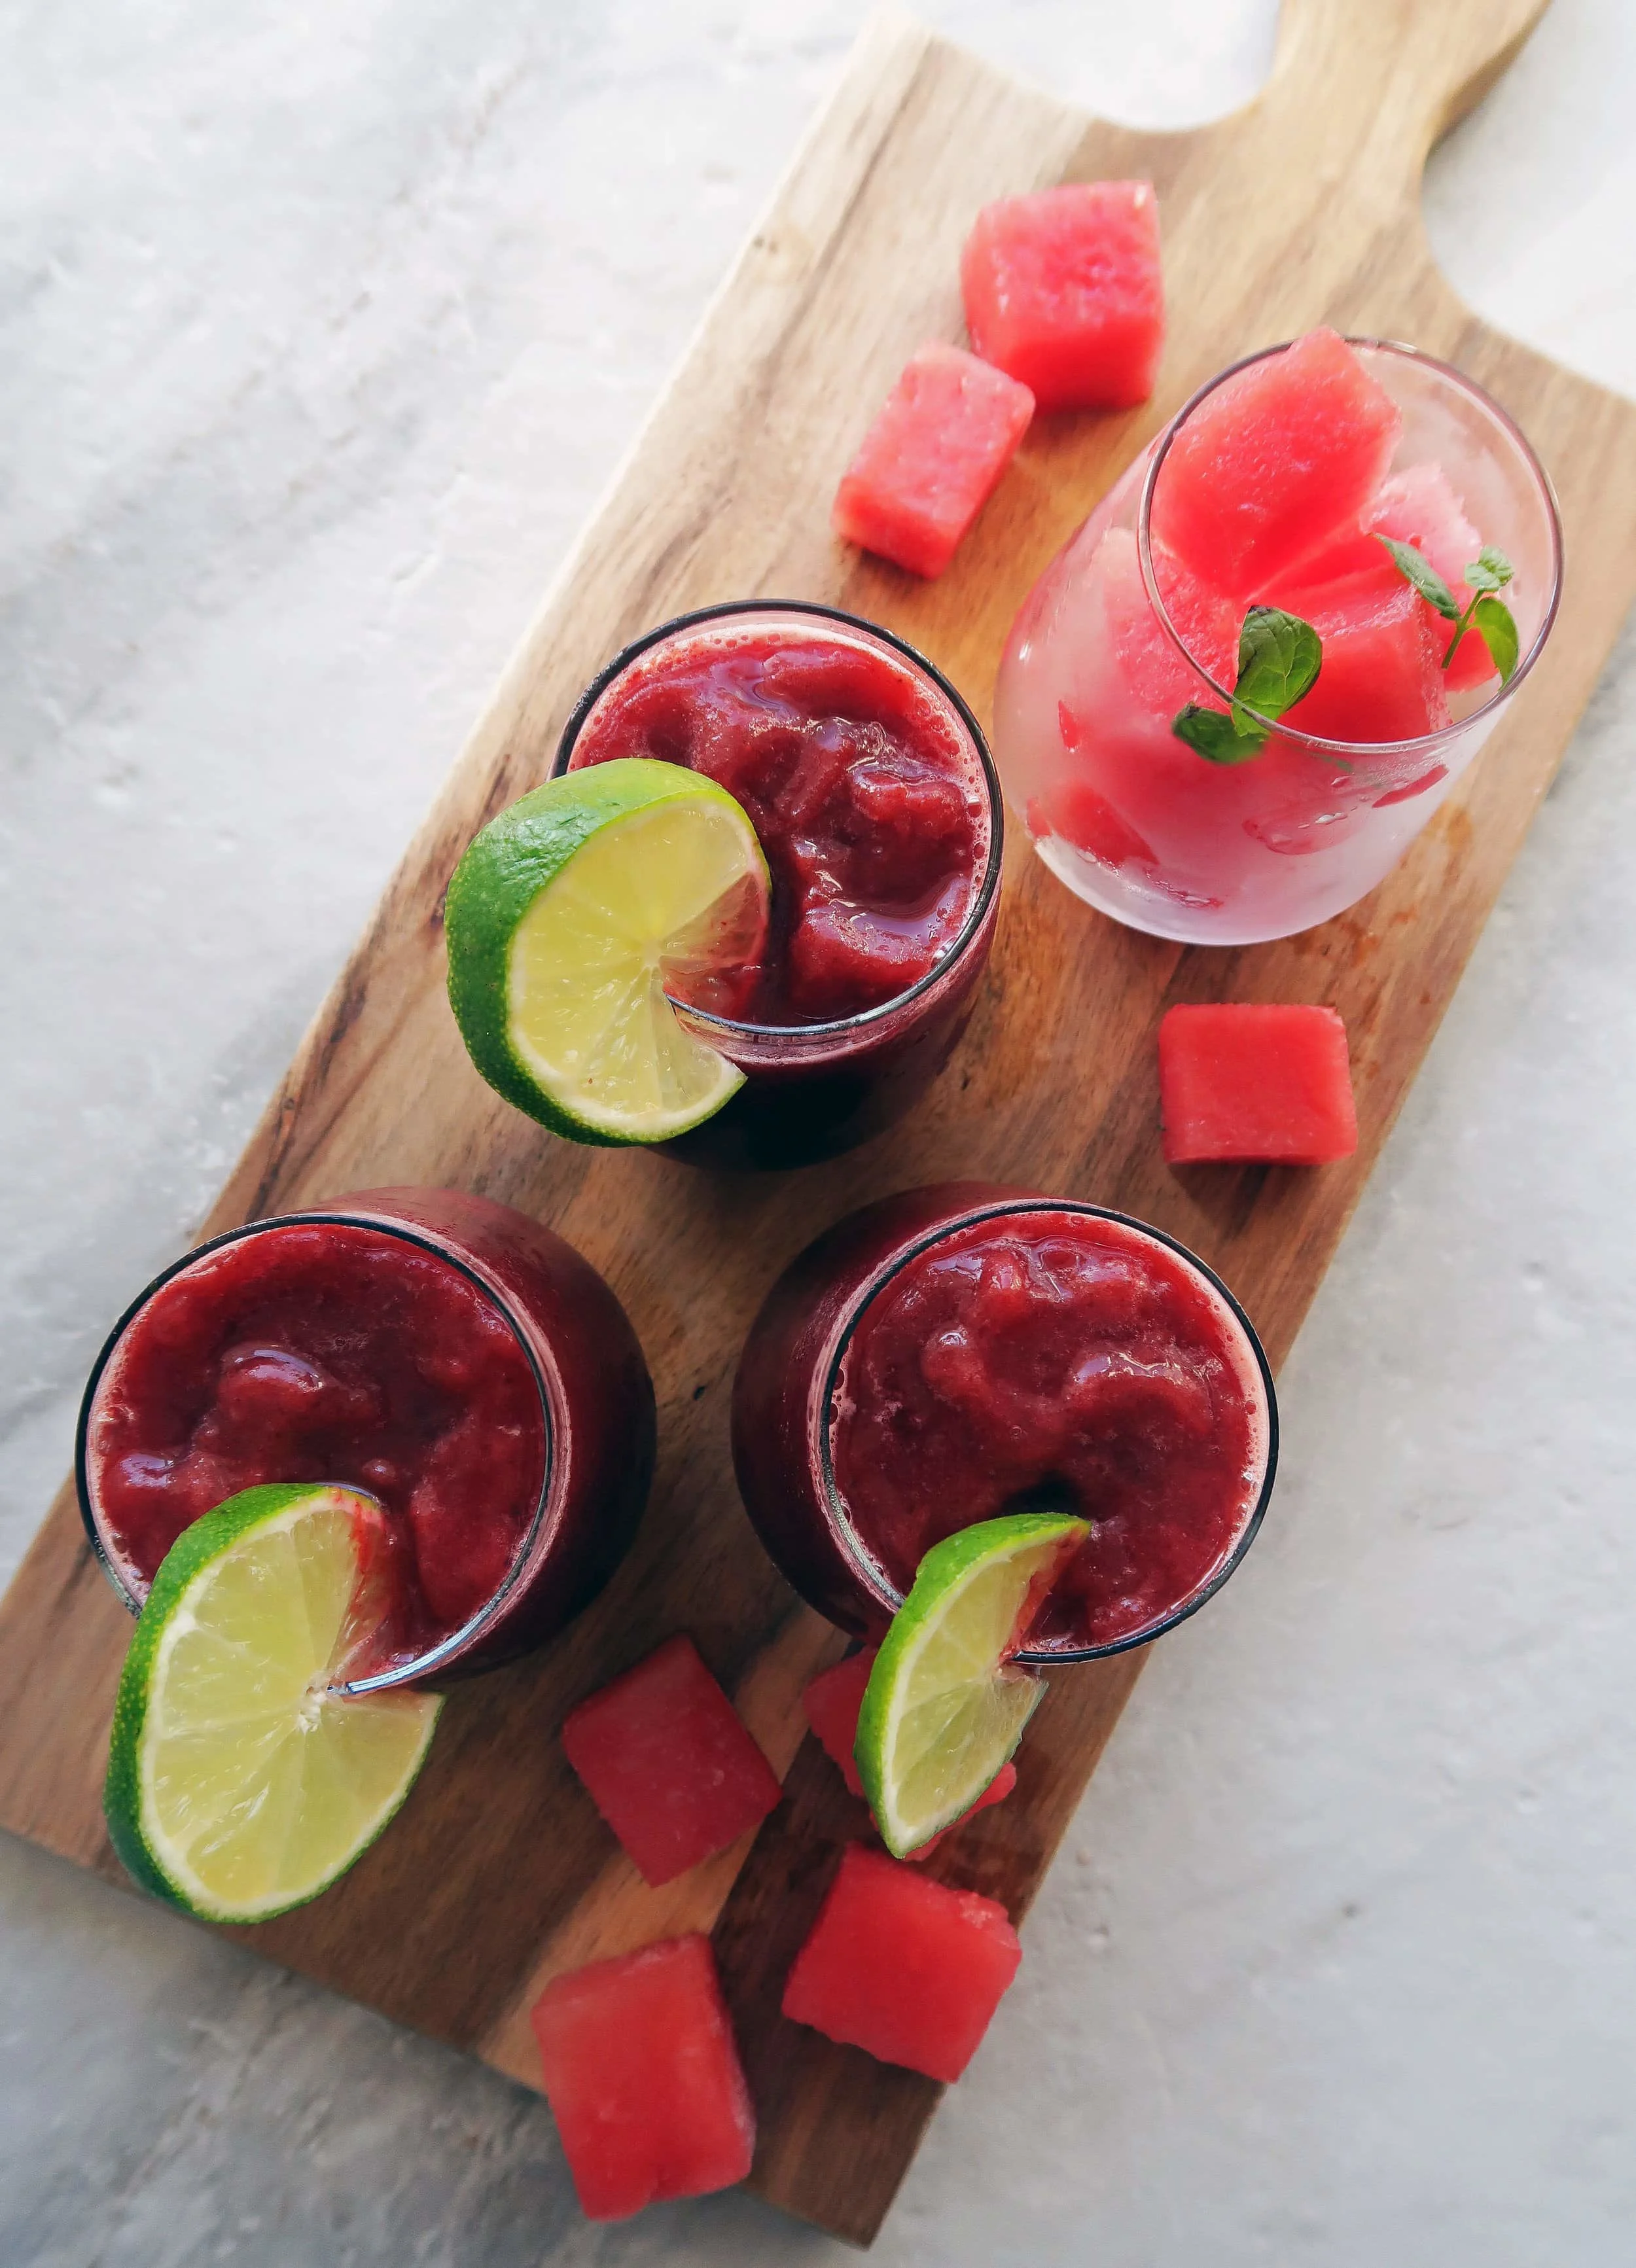 Overhead view of three Watermelon Cherry Slushies in glass cups with a lime slice on each rim, watermelon cubes around it, another glass full of watermelon pieces.